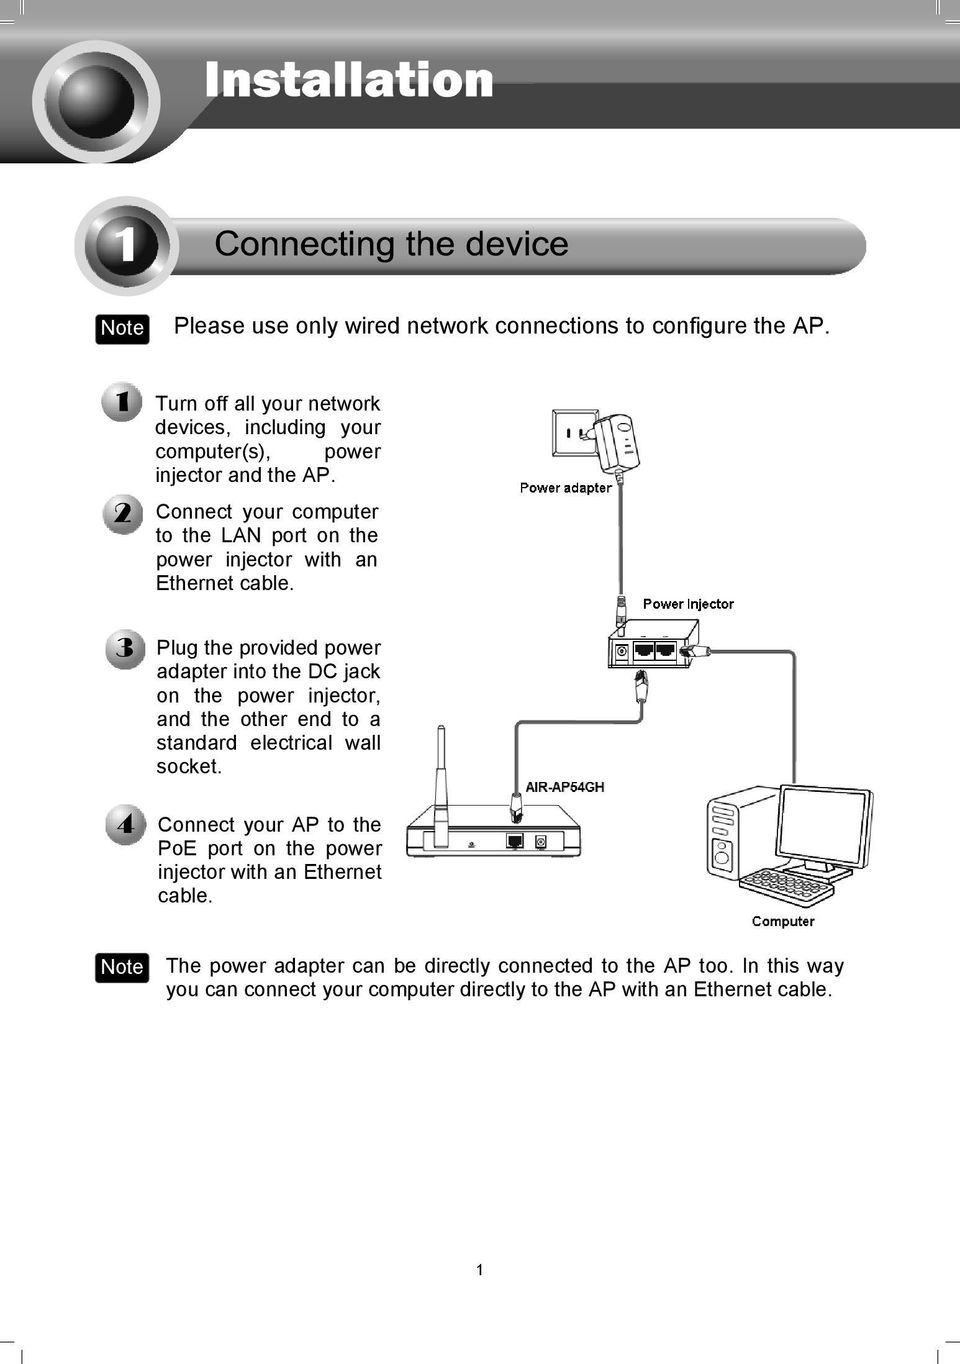 Connect your computer to the LAN port on the power injector with an Ethernet cable.